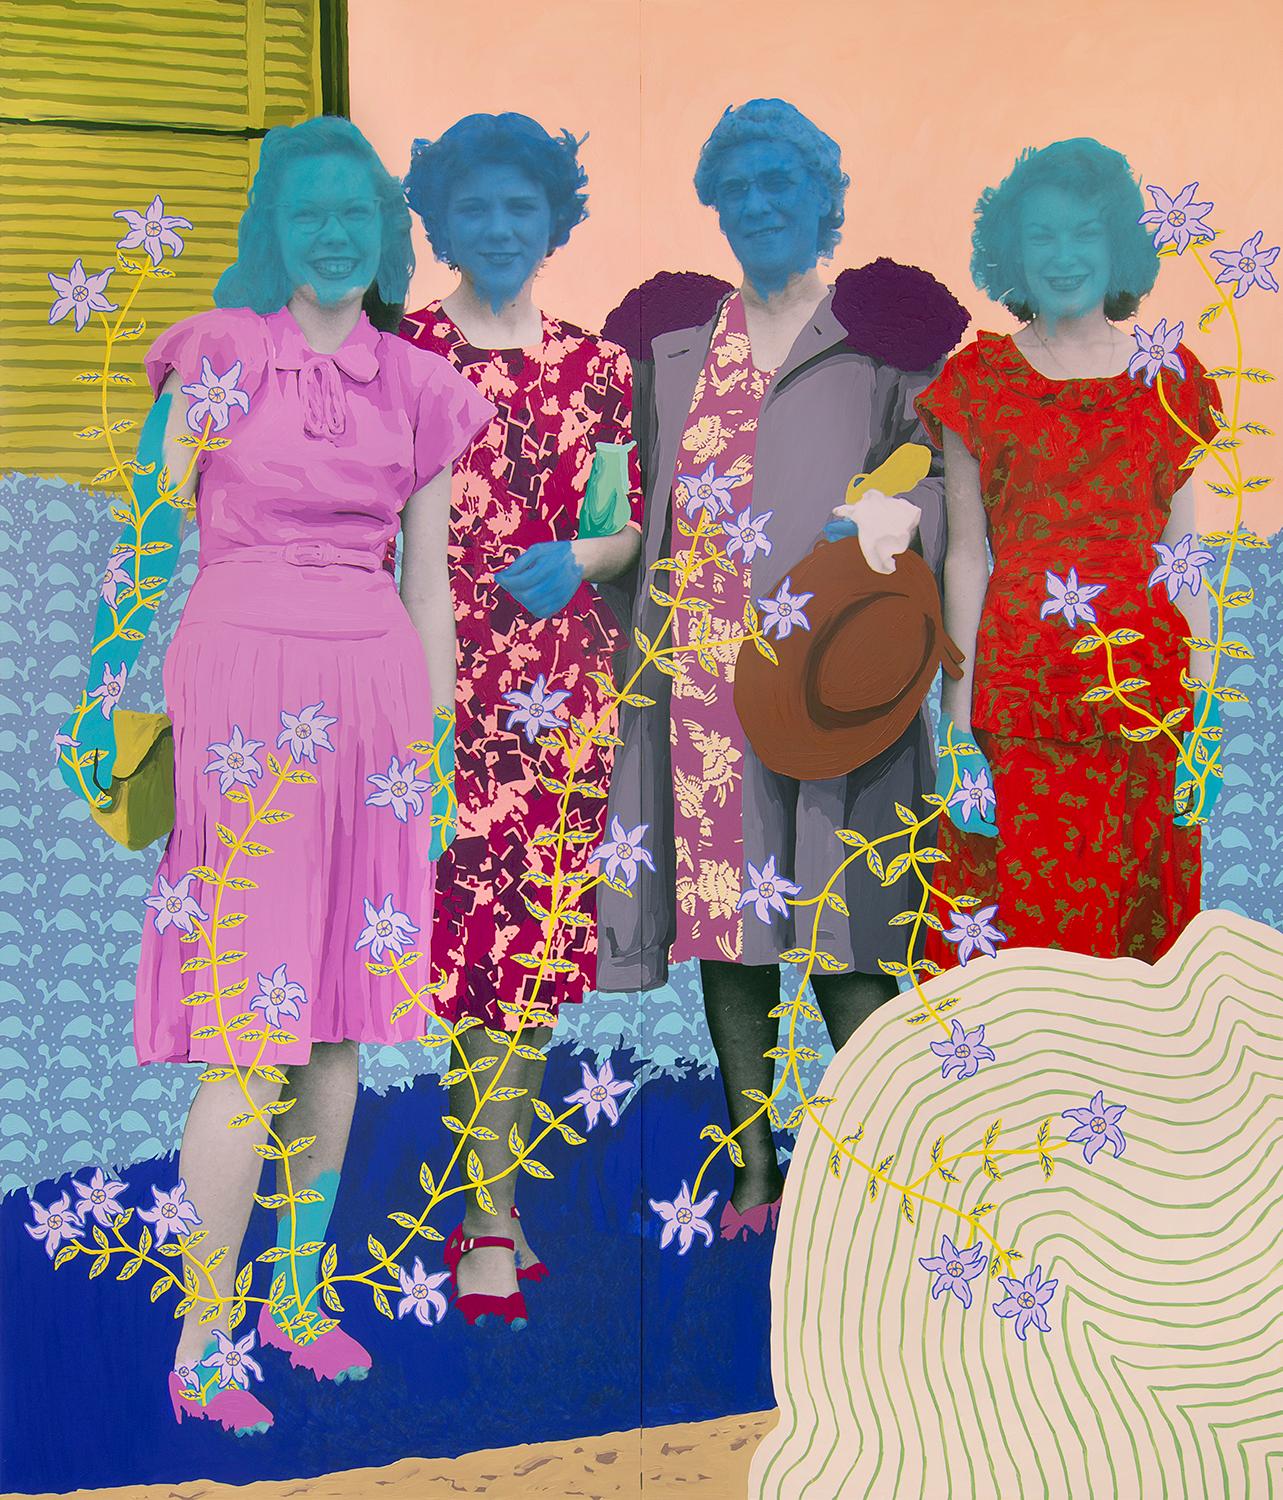 Untitled (Family Members with Patterned Dresses and Car)